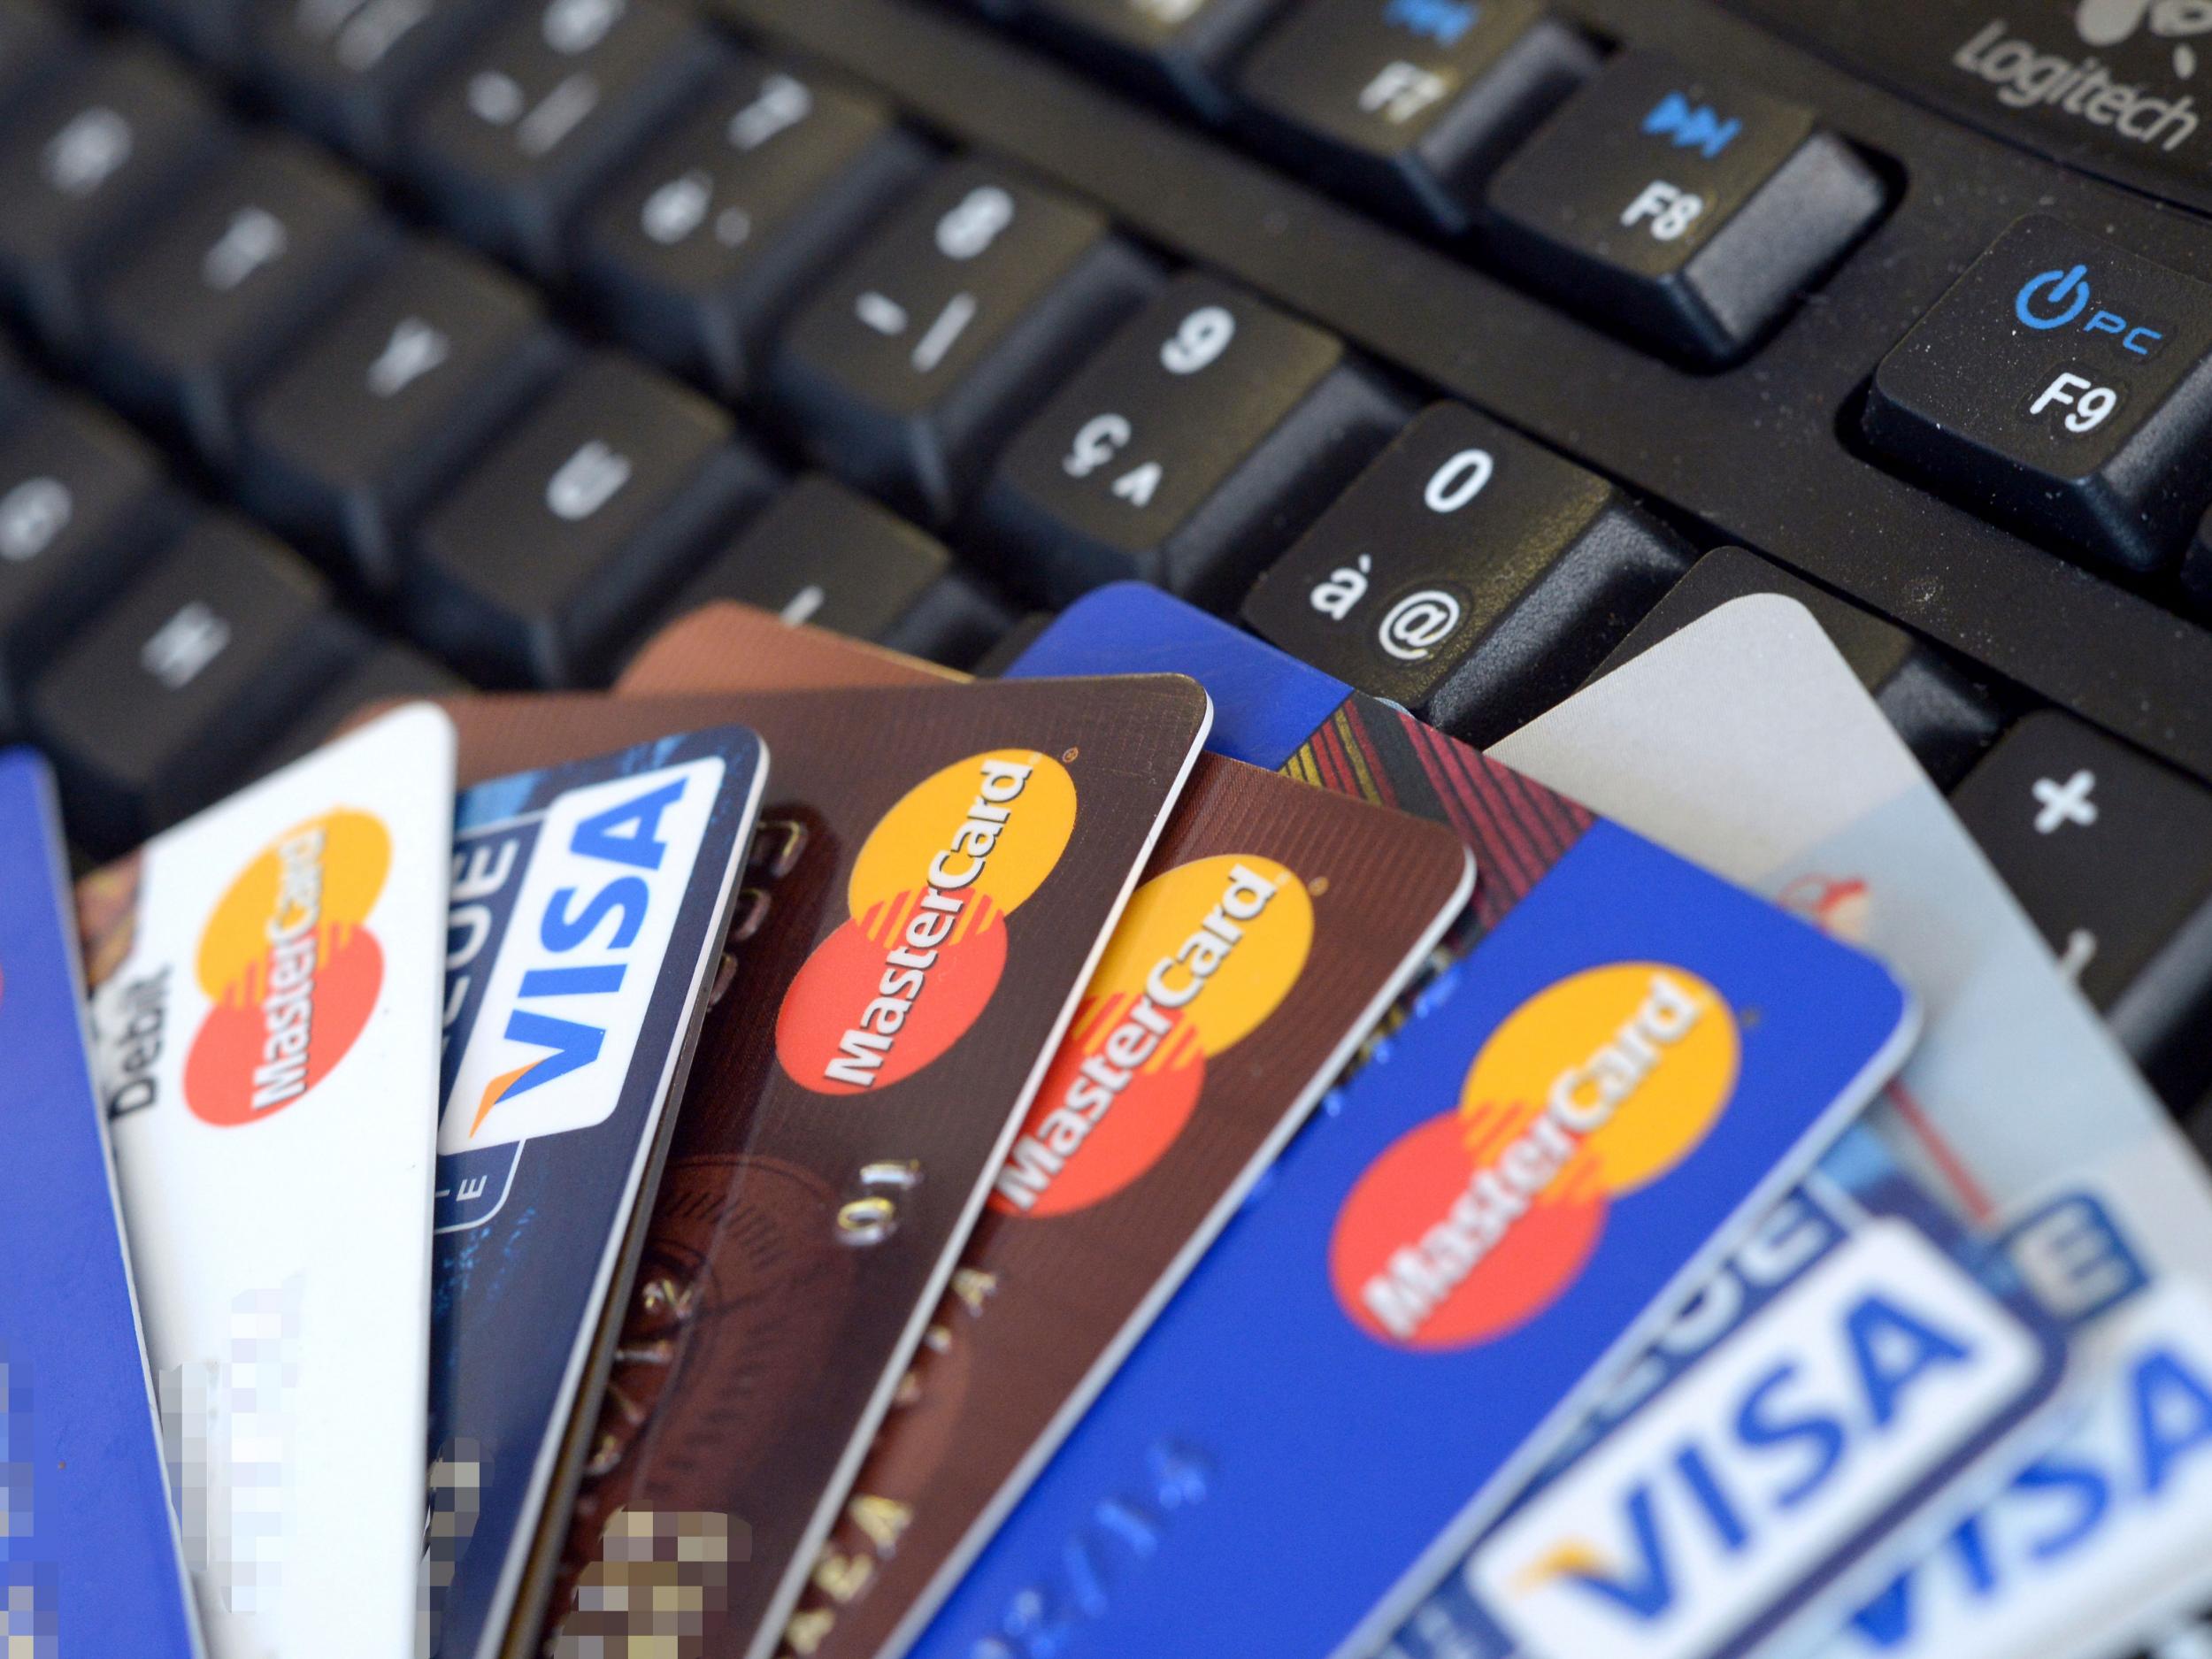 "I love credit cards because I don't misuse them" Getty